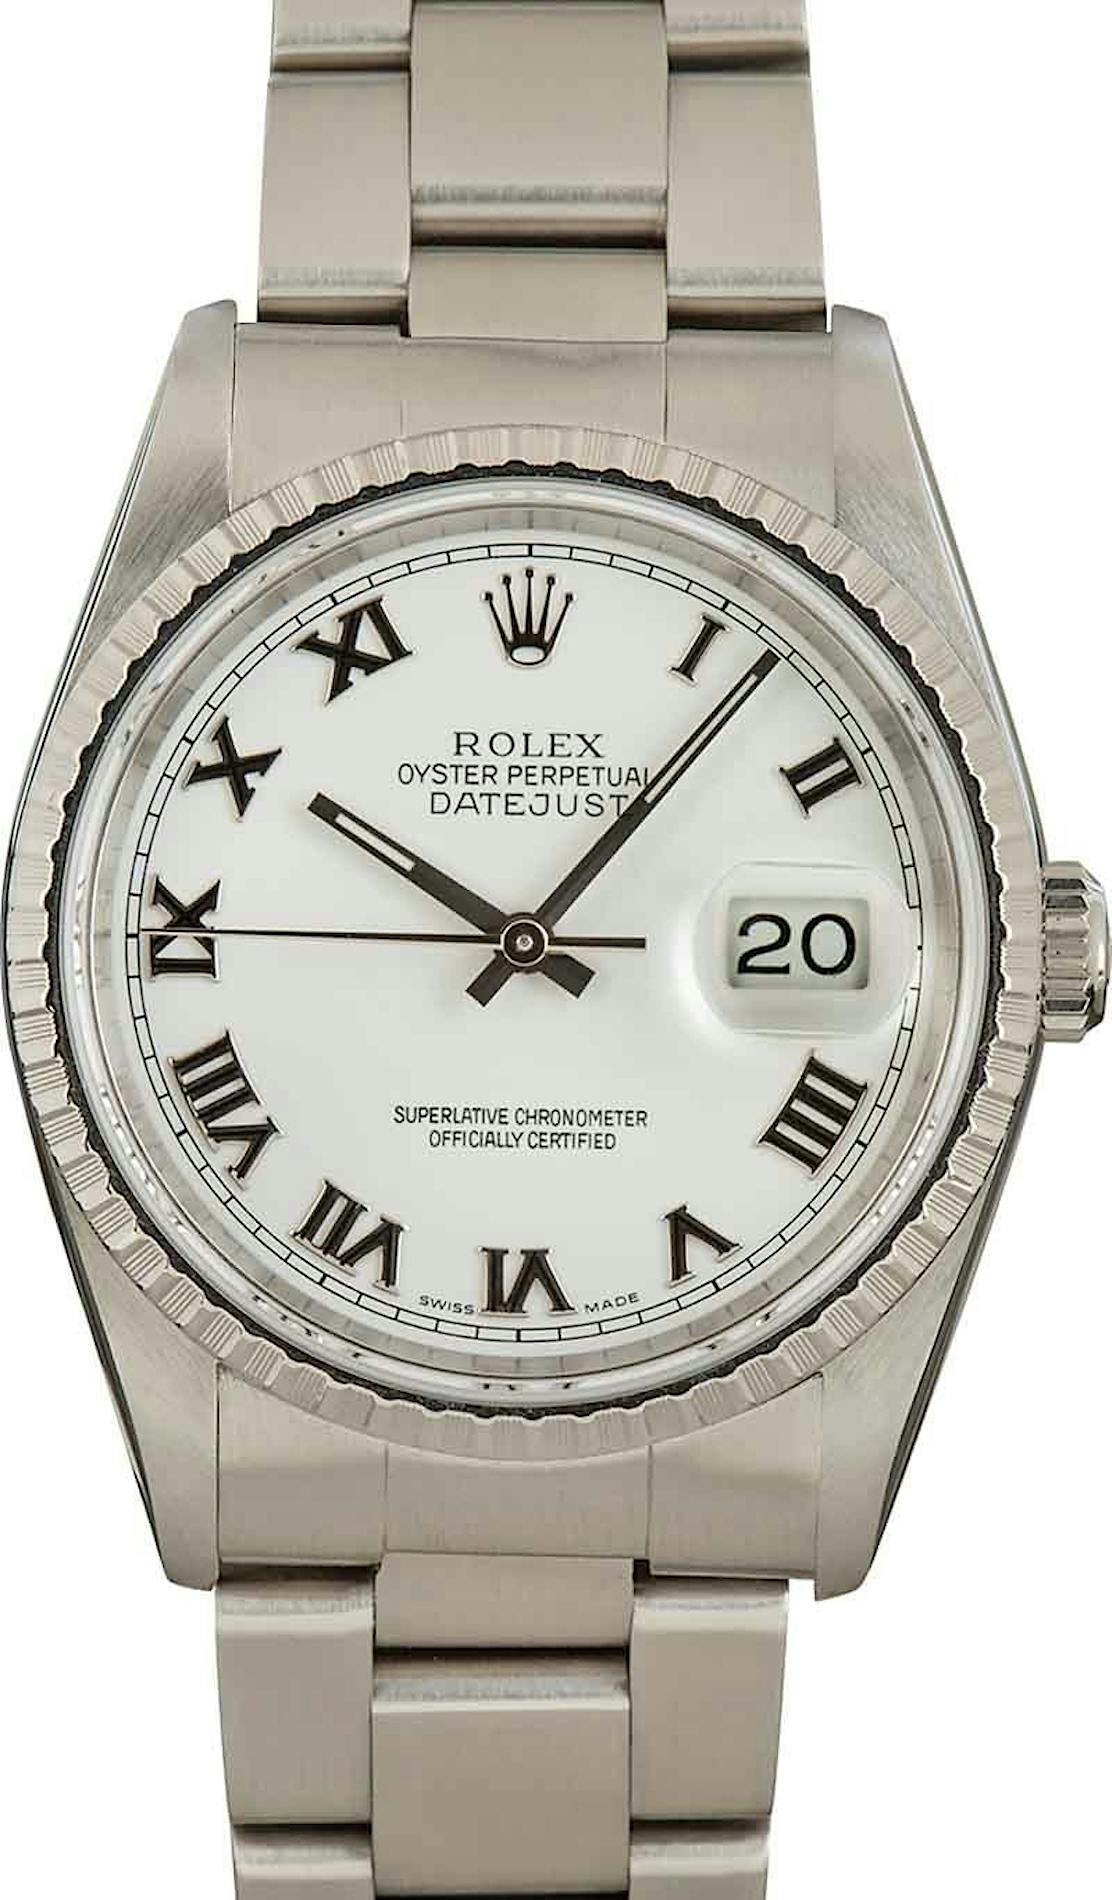 PreOwned Rolex Datejust 16220 White Roman Dial